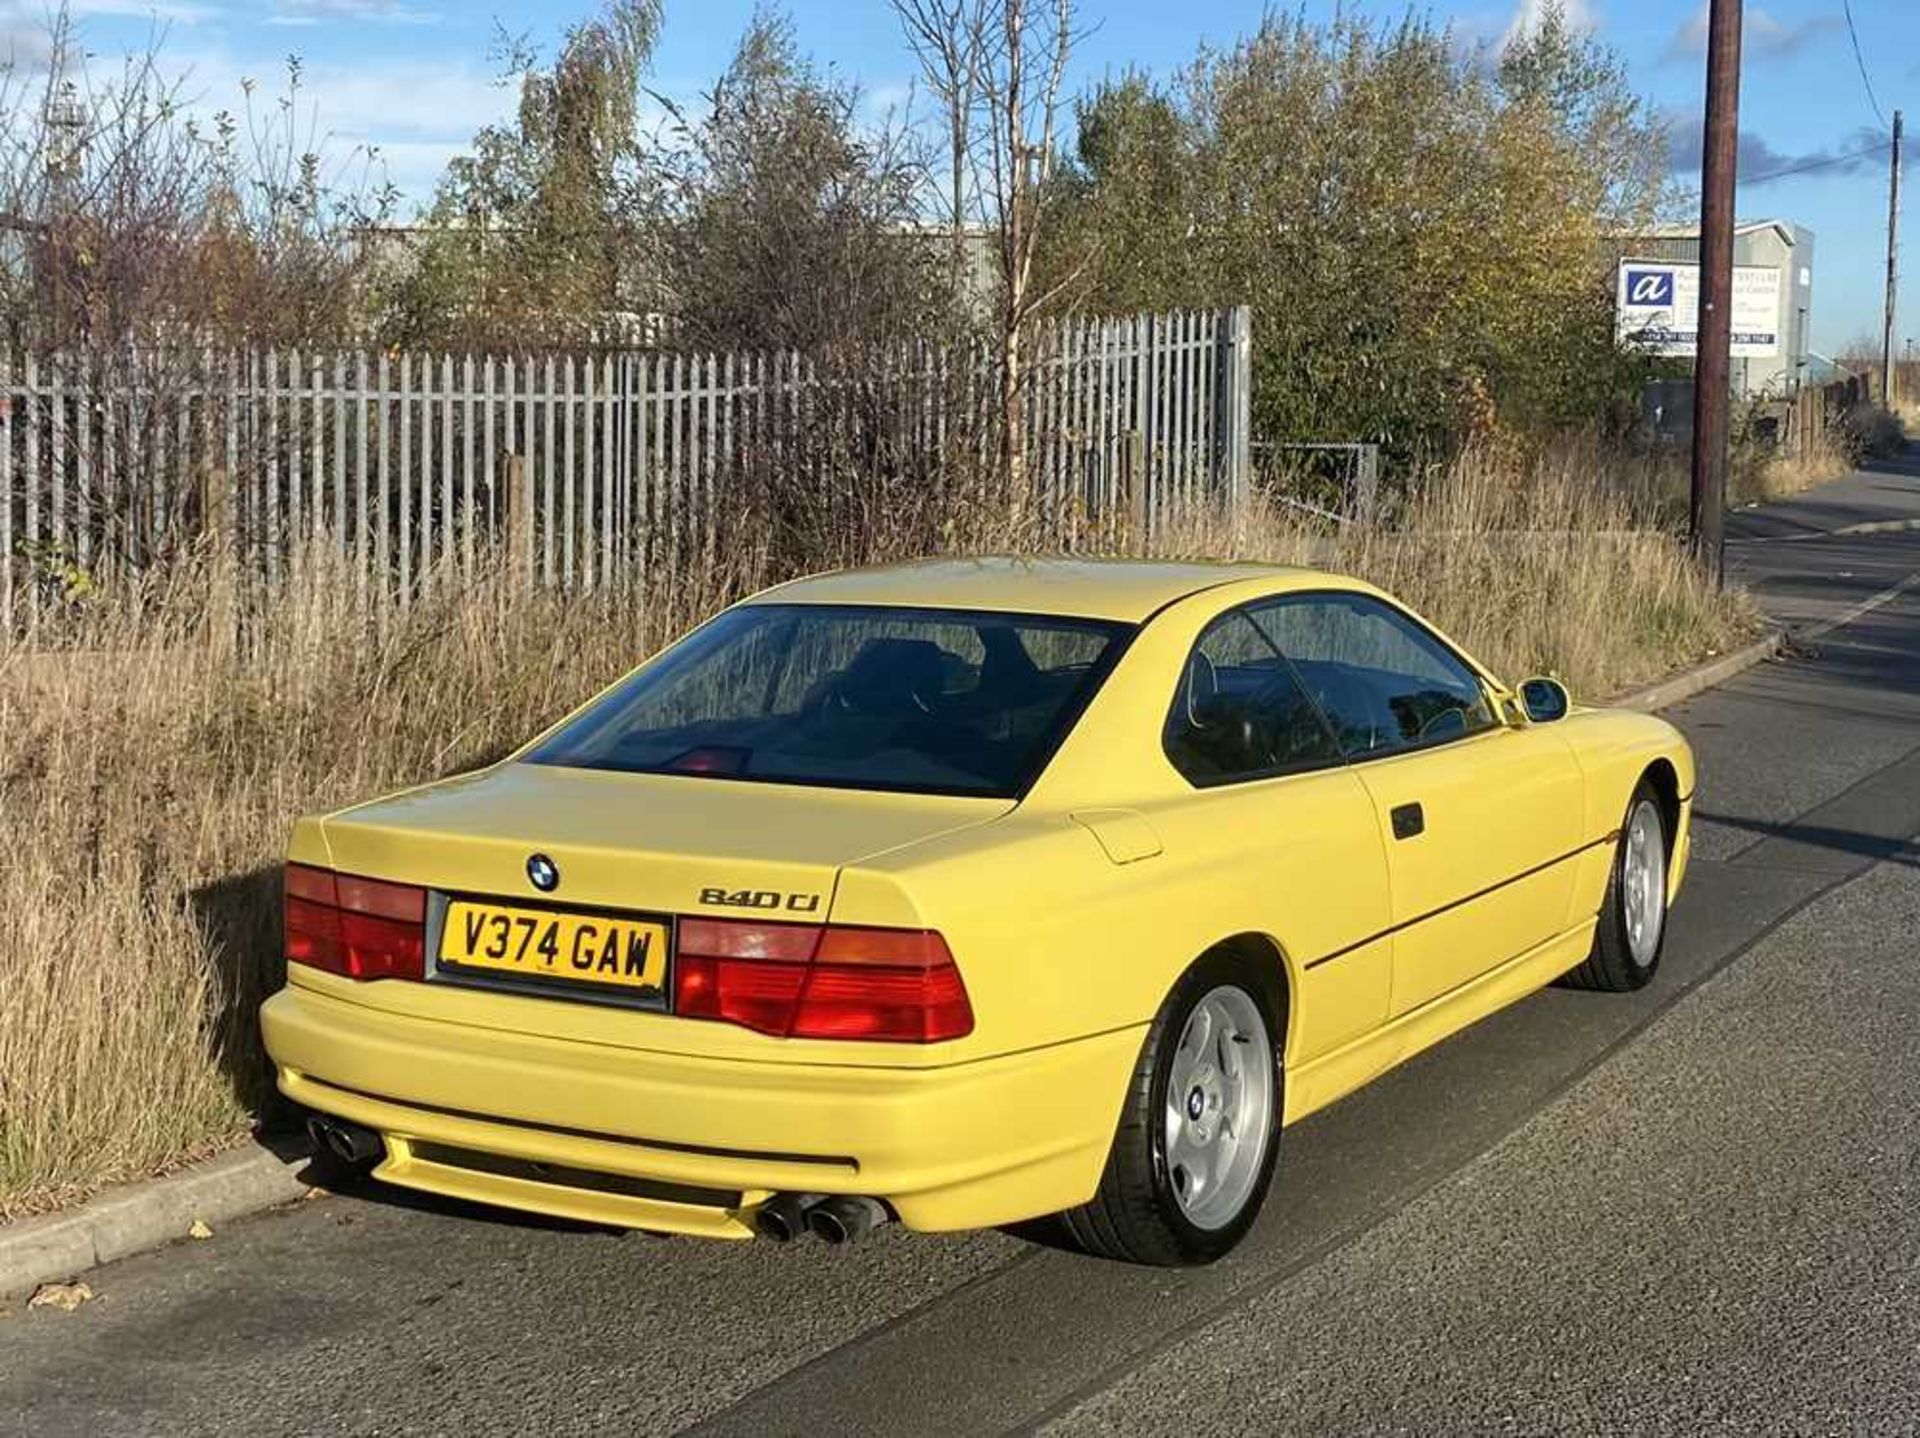 1997 BMW 840 CI Sport Understood to be 1 of just 38 finished in Dakar Yellow II - Image 20 of 79